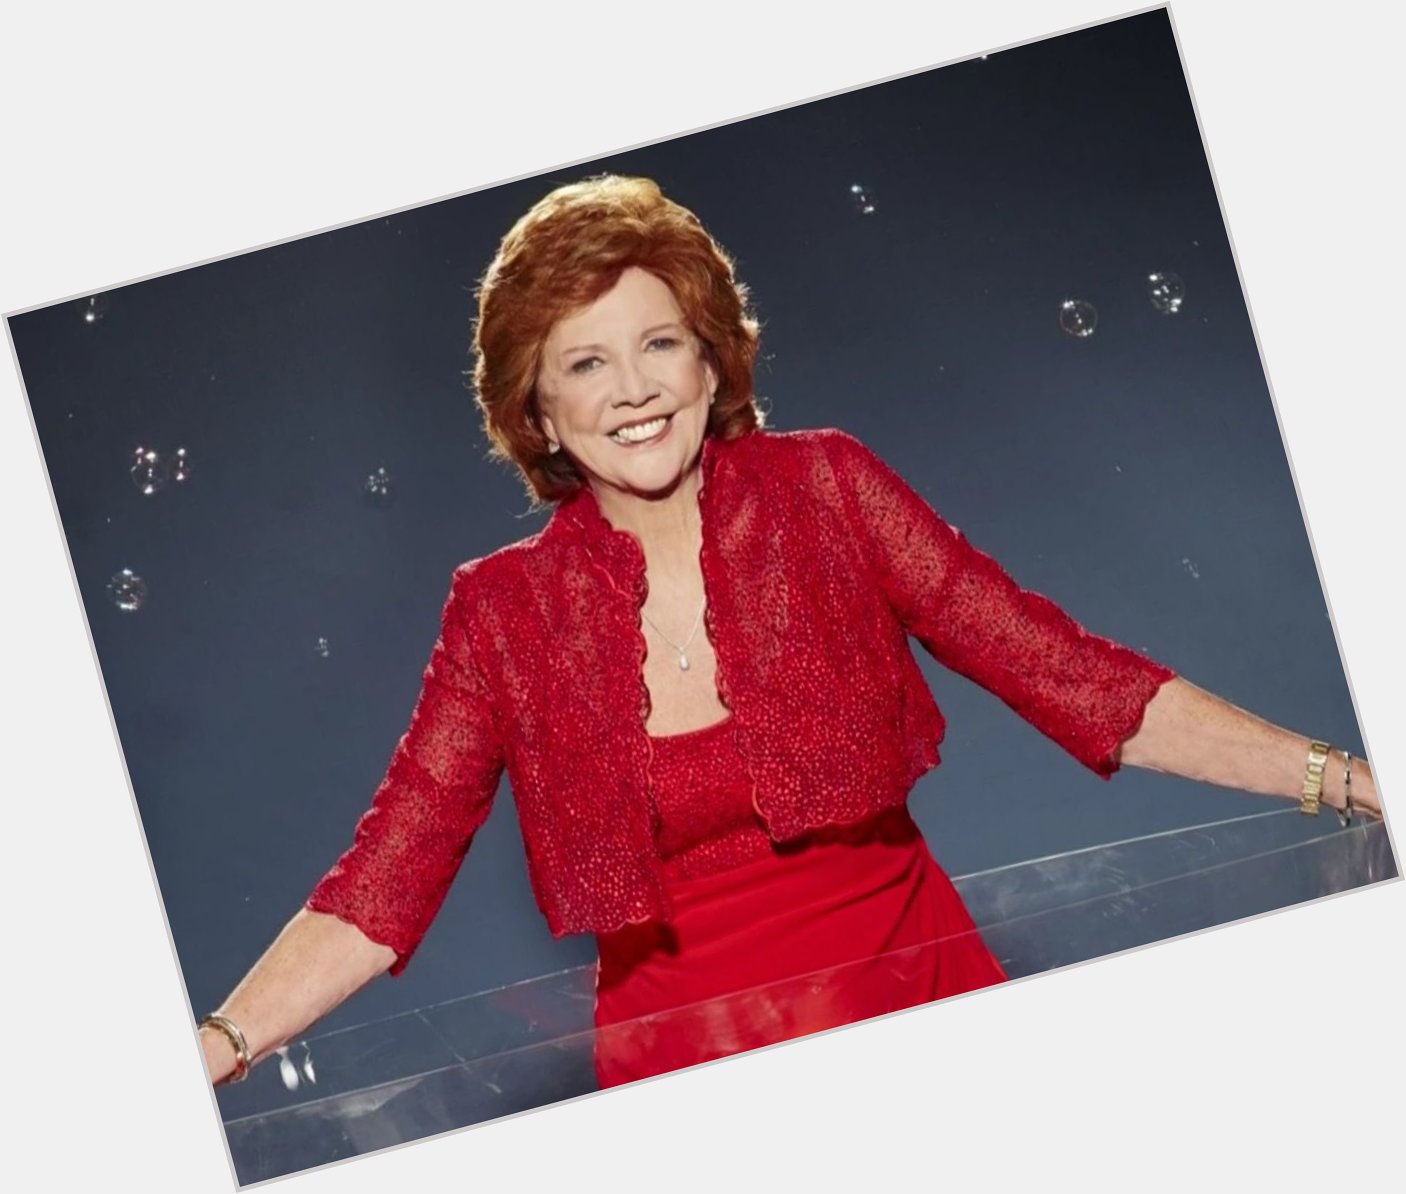 Happy Heavenly Birthday to Cilla Black, who would have been 80 years old today 